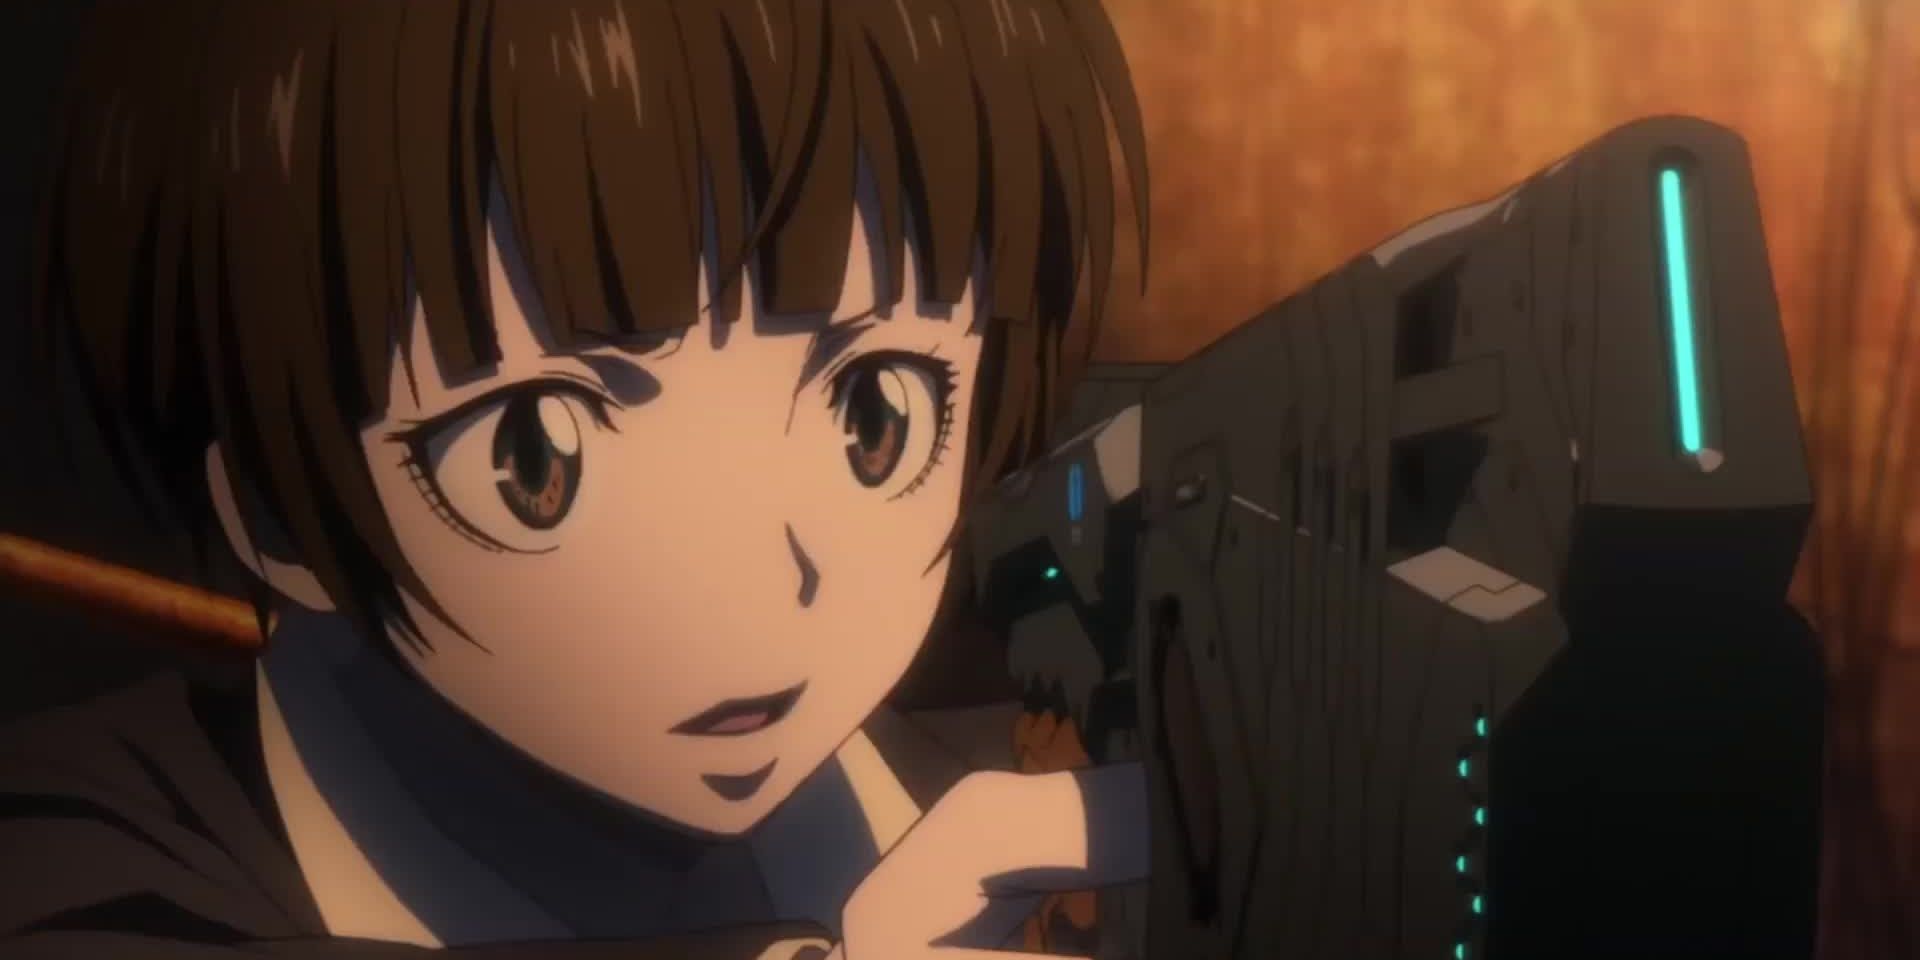 An image of a character from Psycho-Pass holding a rifle